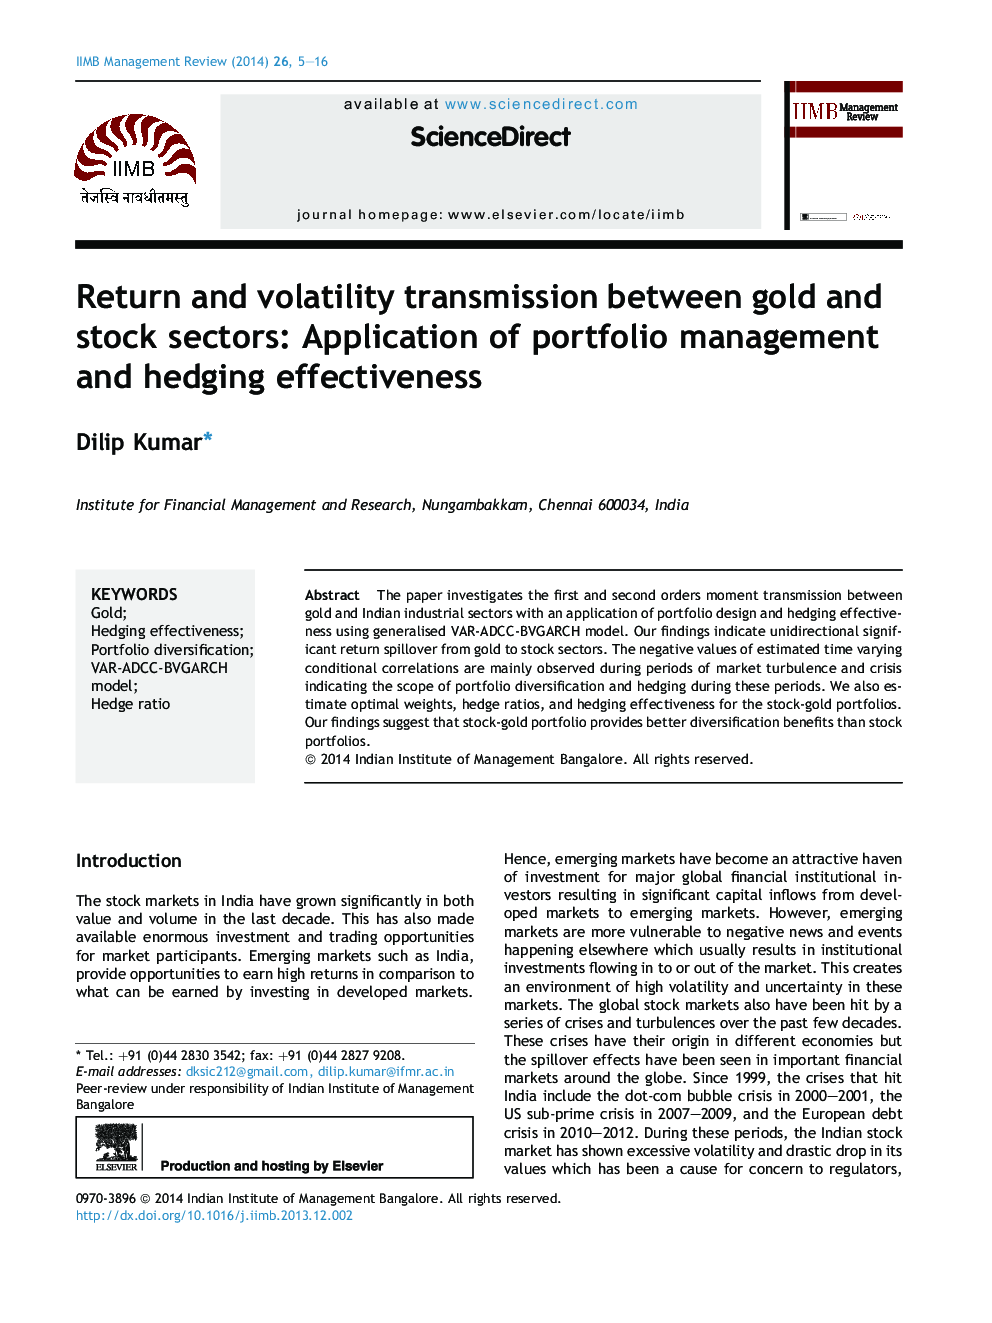 Return and volatility transmission between gold and stock sectors: Application of portfolio management and hedging effectiveness